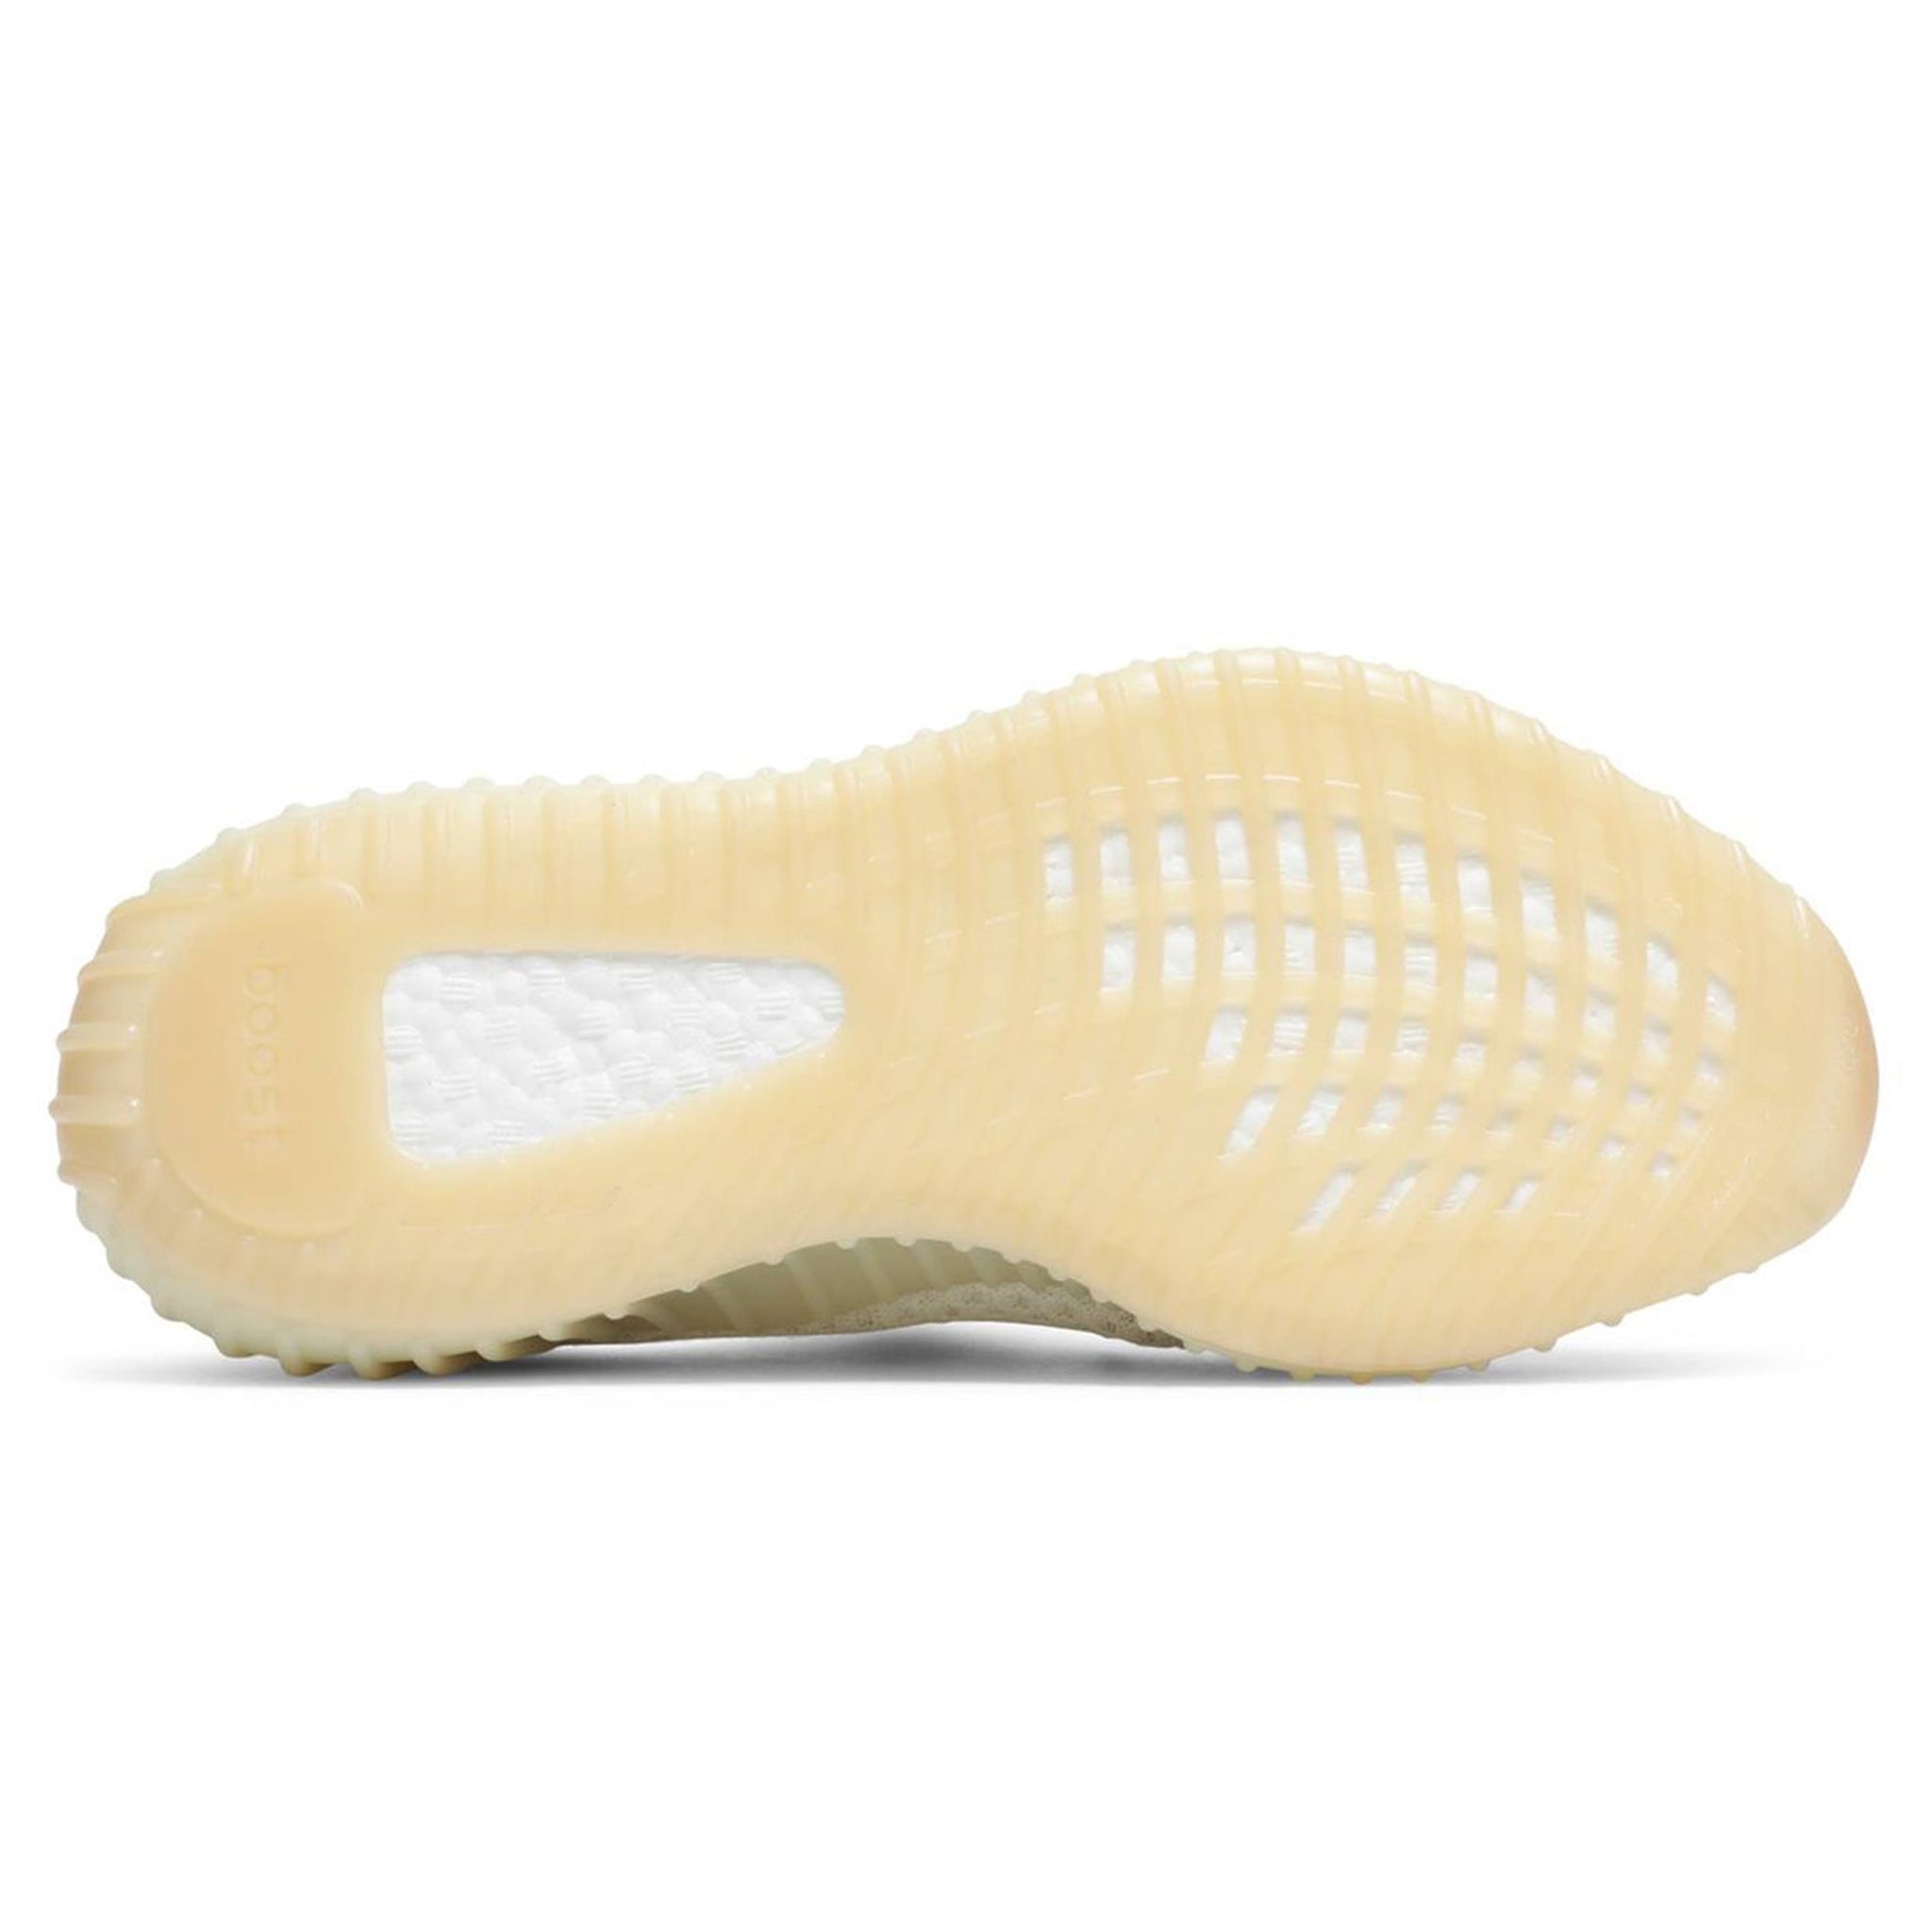 Sole view of Adidas Yeezy Boost 350 V2 Light GY3438